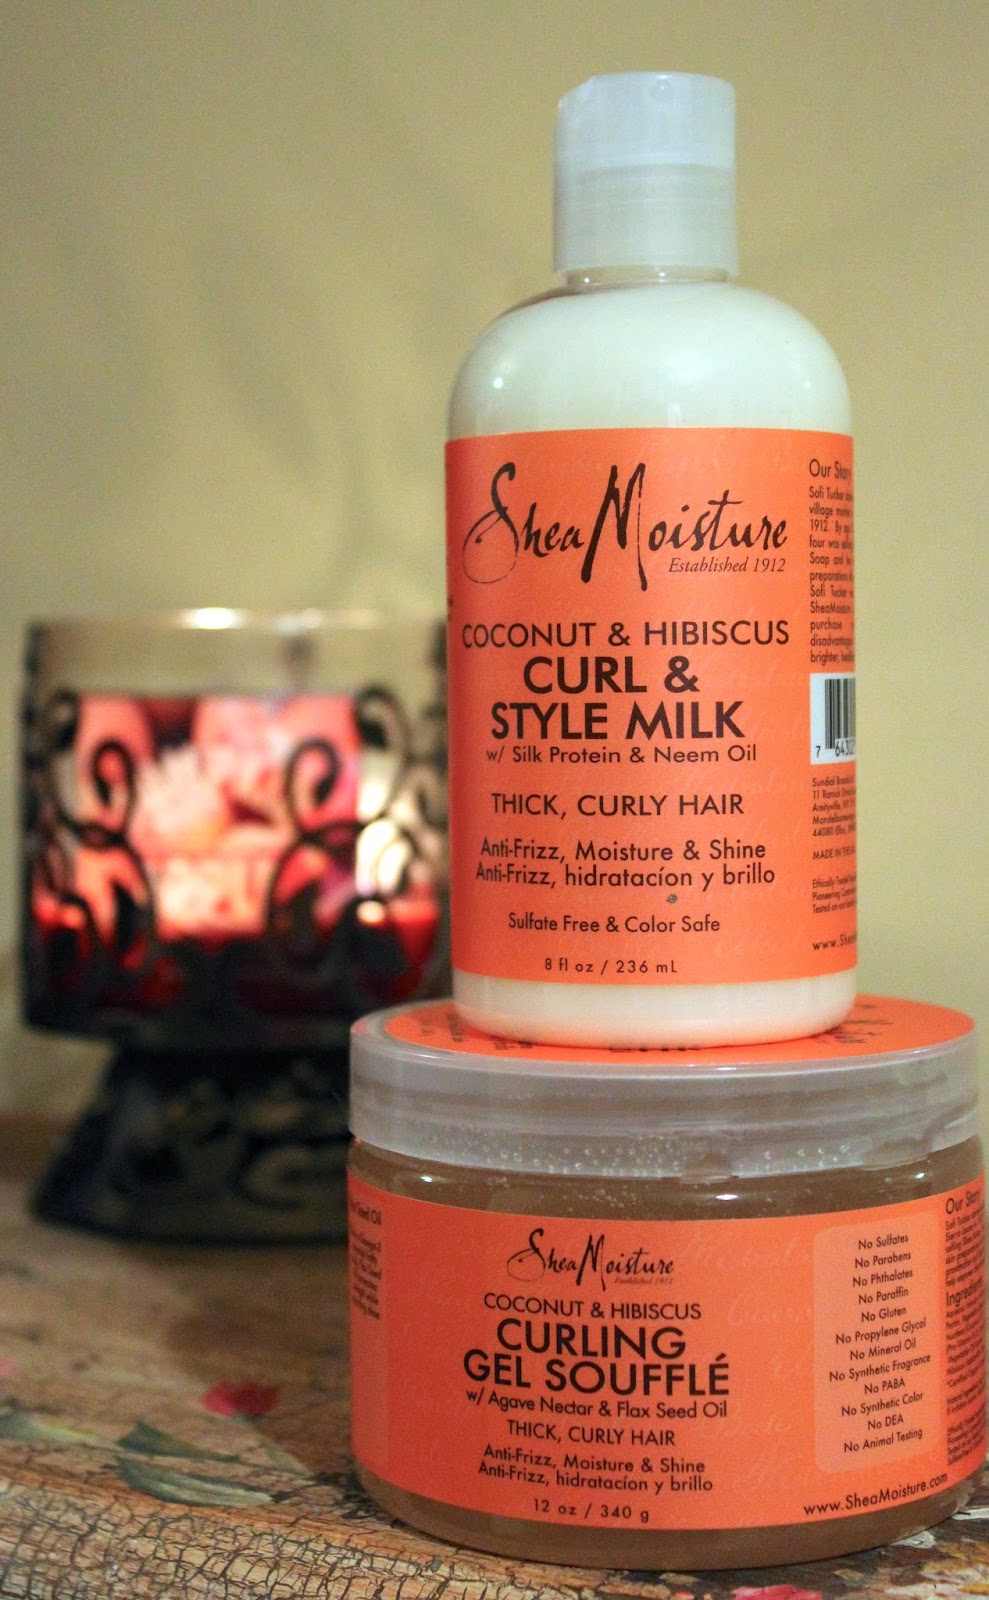 live loveliness: Shea Moisture Curl & Style Milk Review